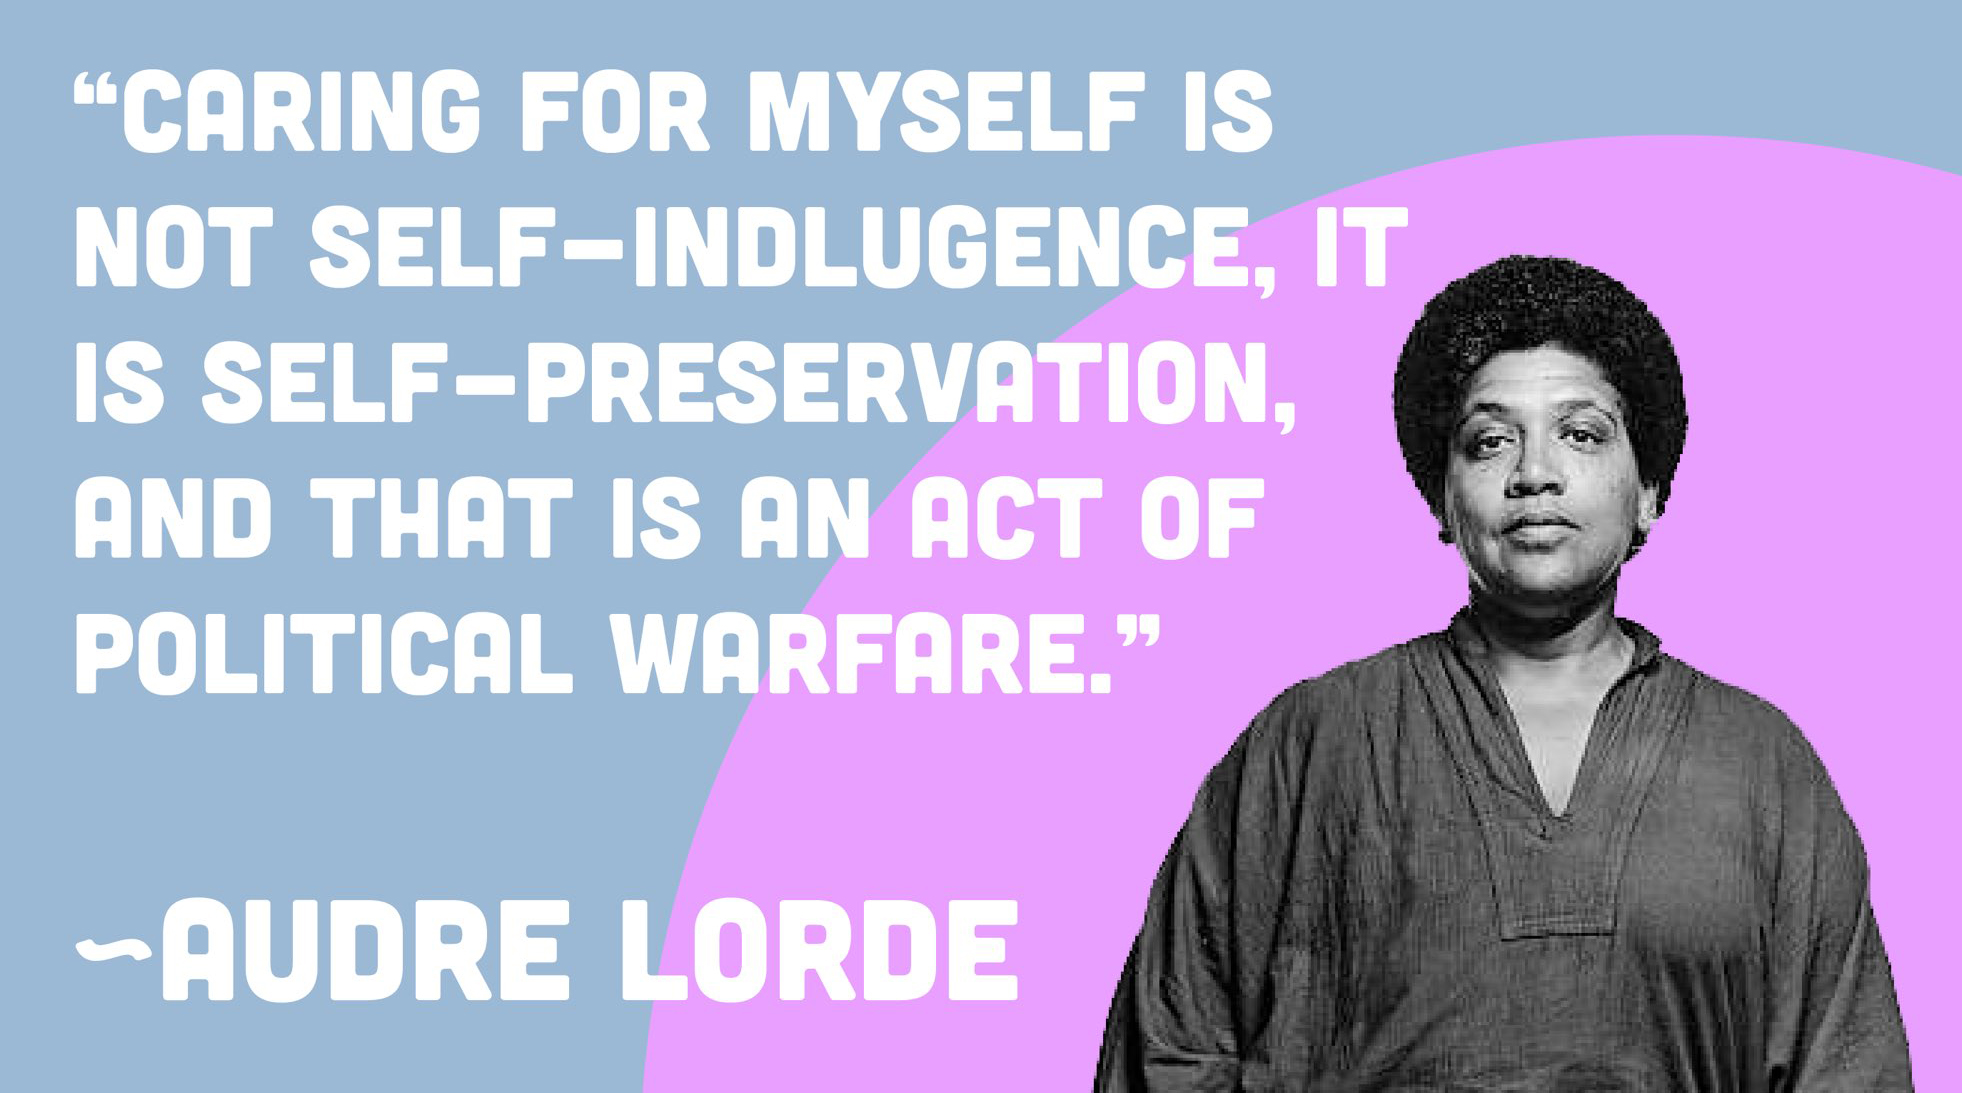 Audre Lorde photo and quote